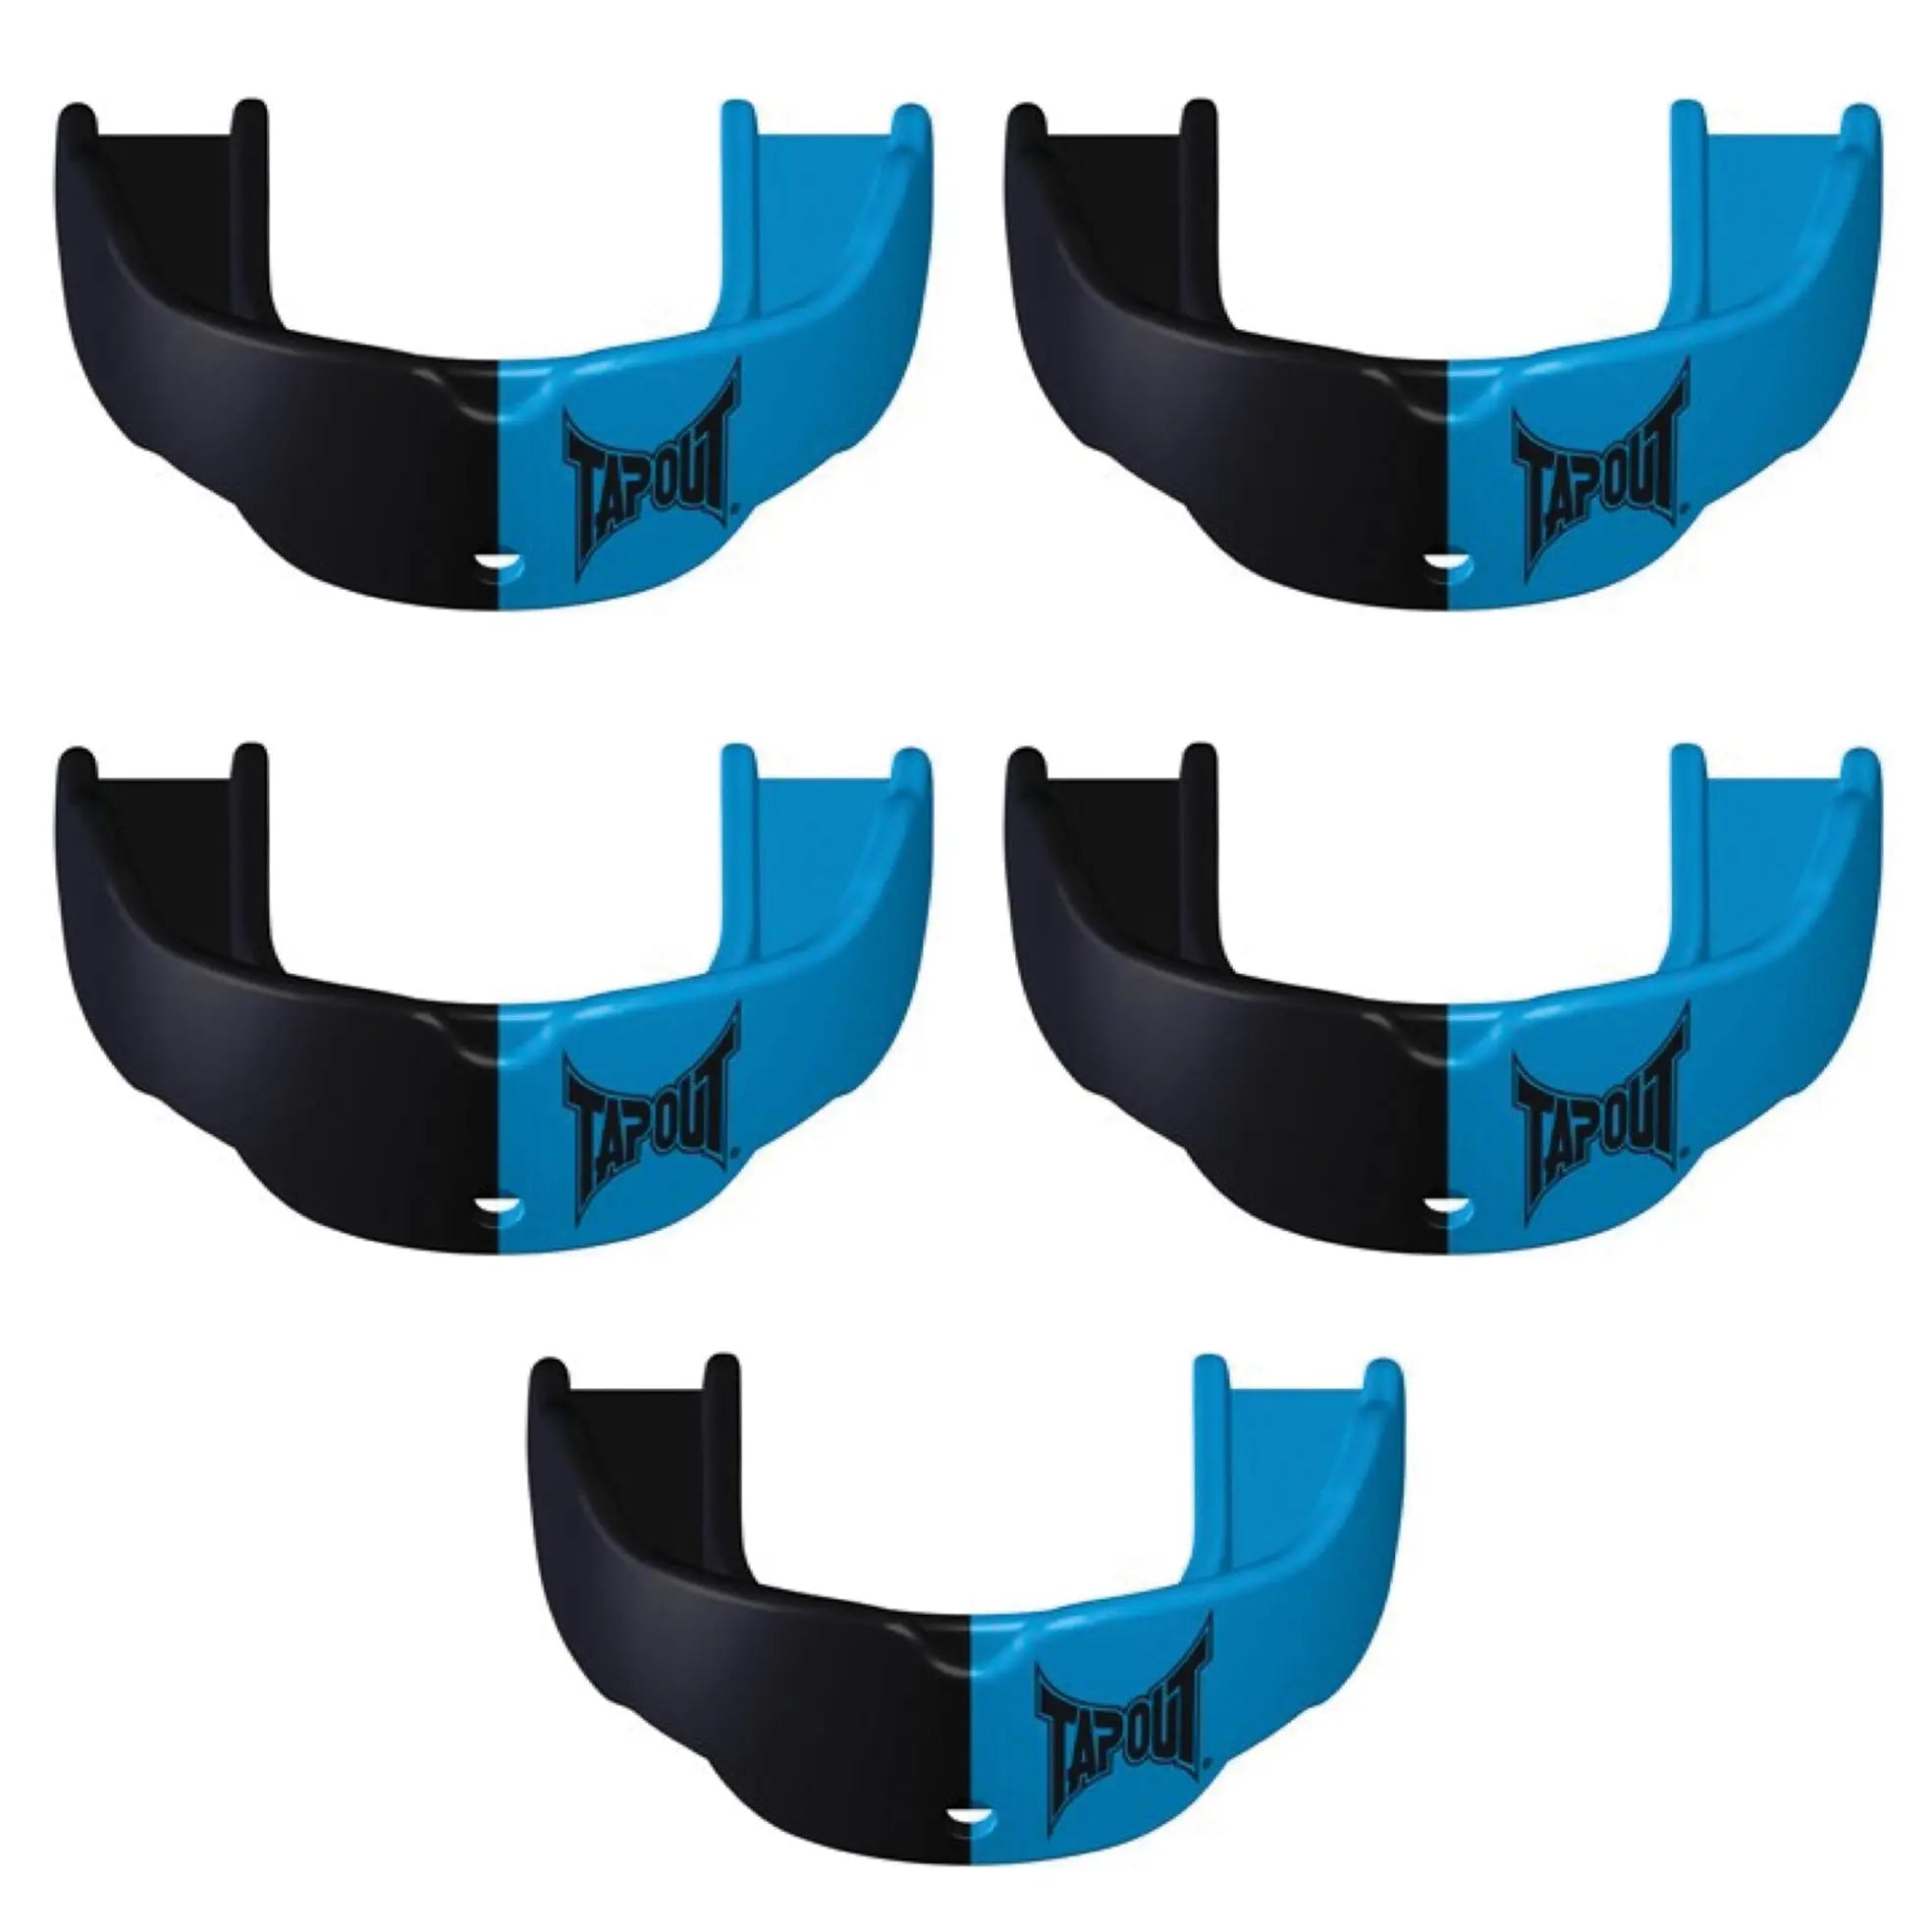 Tapout Youth Protective Sports Mouthguard with Strap 5-Pack - Columbia Blue/Black Tapout